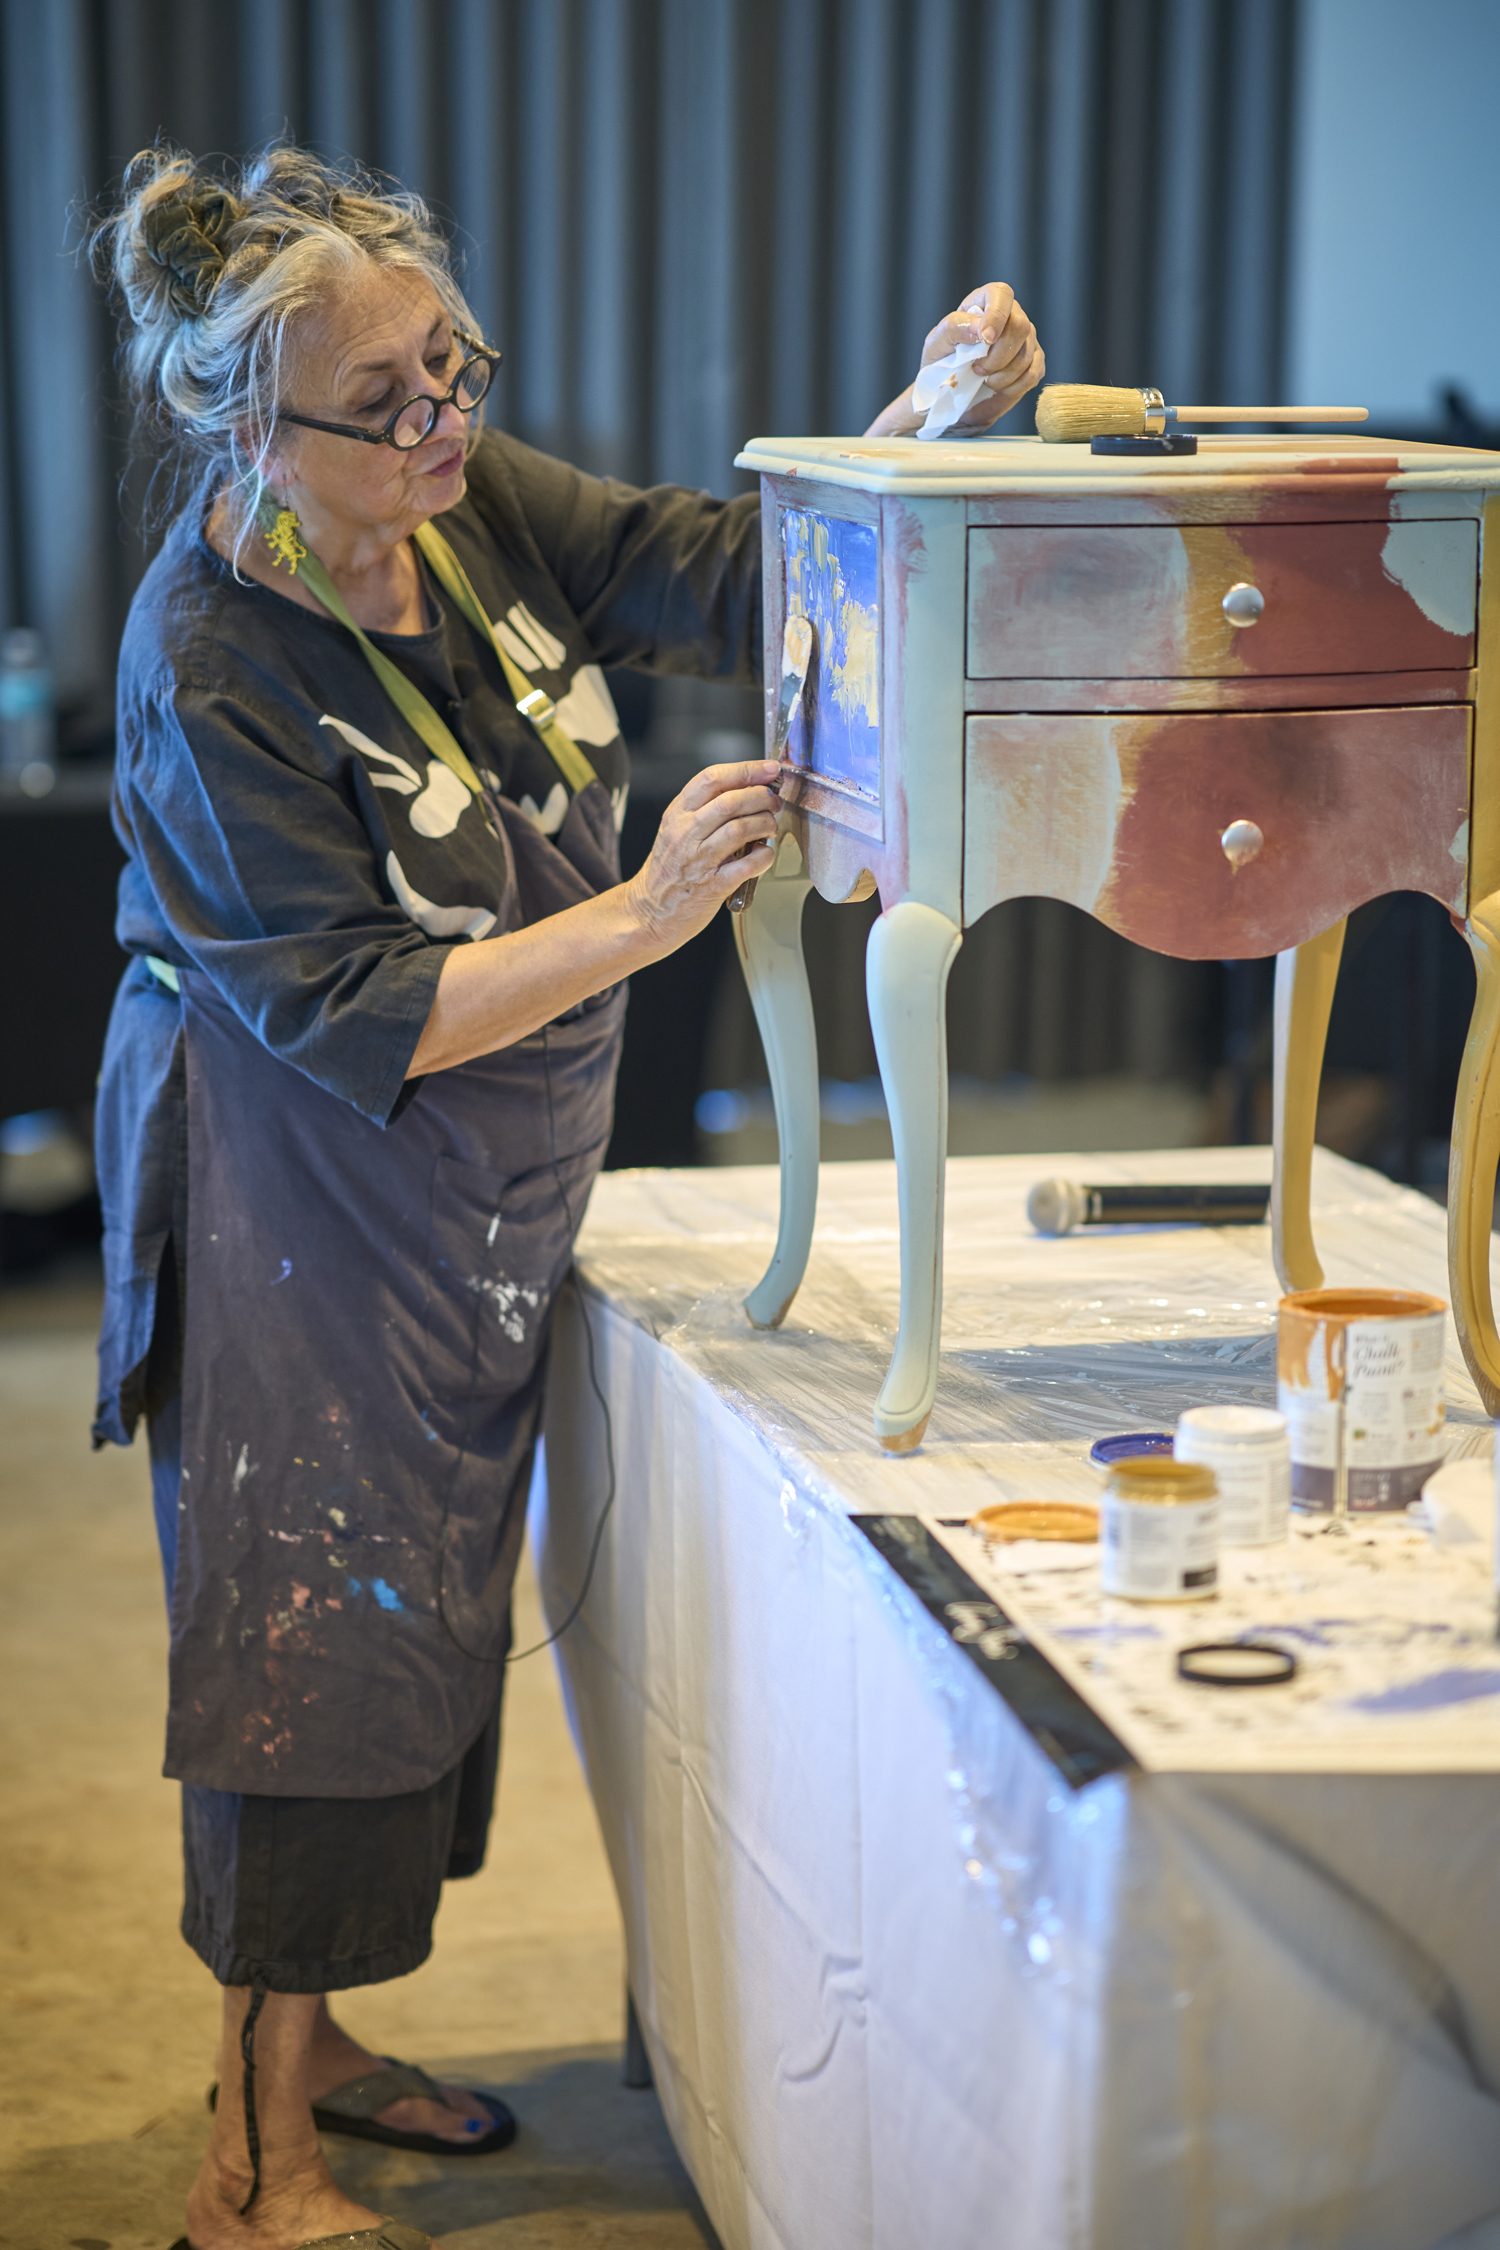 Annie Sloan giving a furniture painting demonstration on a small side table in NOLA